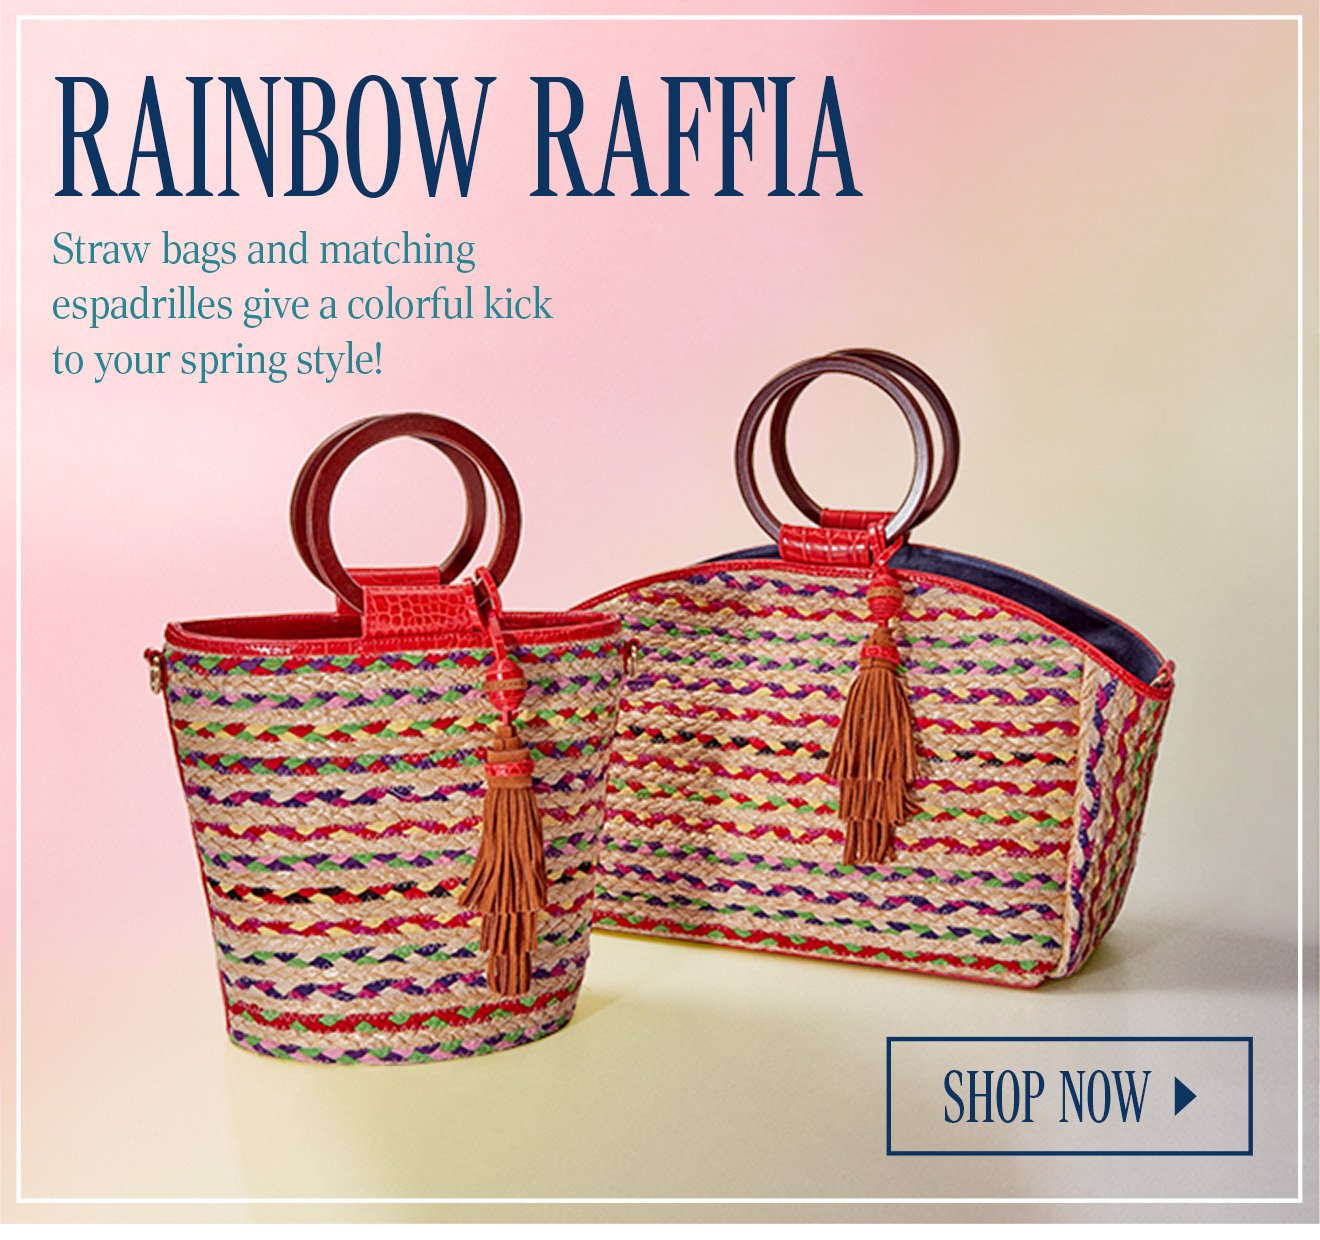 RAINBOW RAFFA. Straw bags and matching espadrilles give a colorful kick to your spring style! SHOP NOW